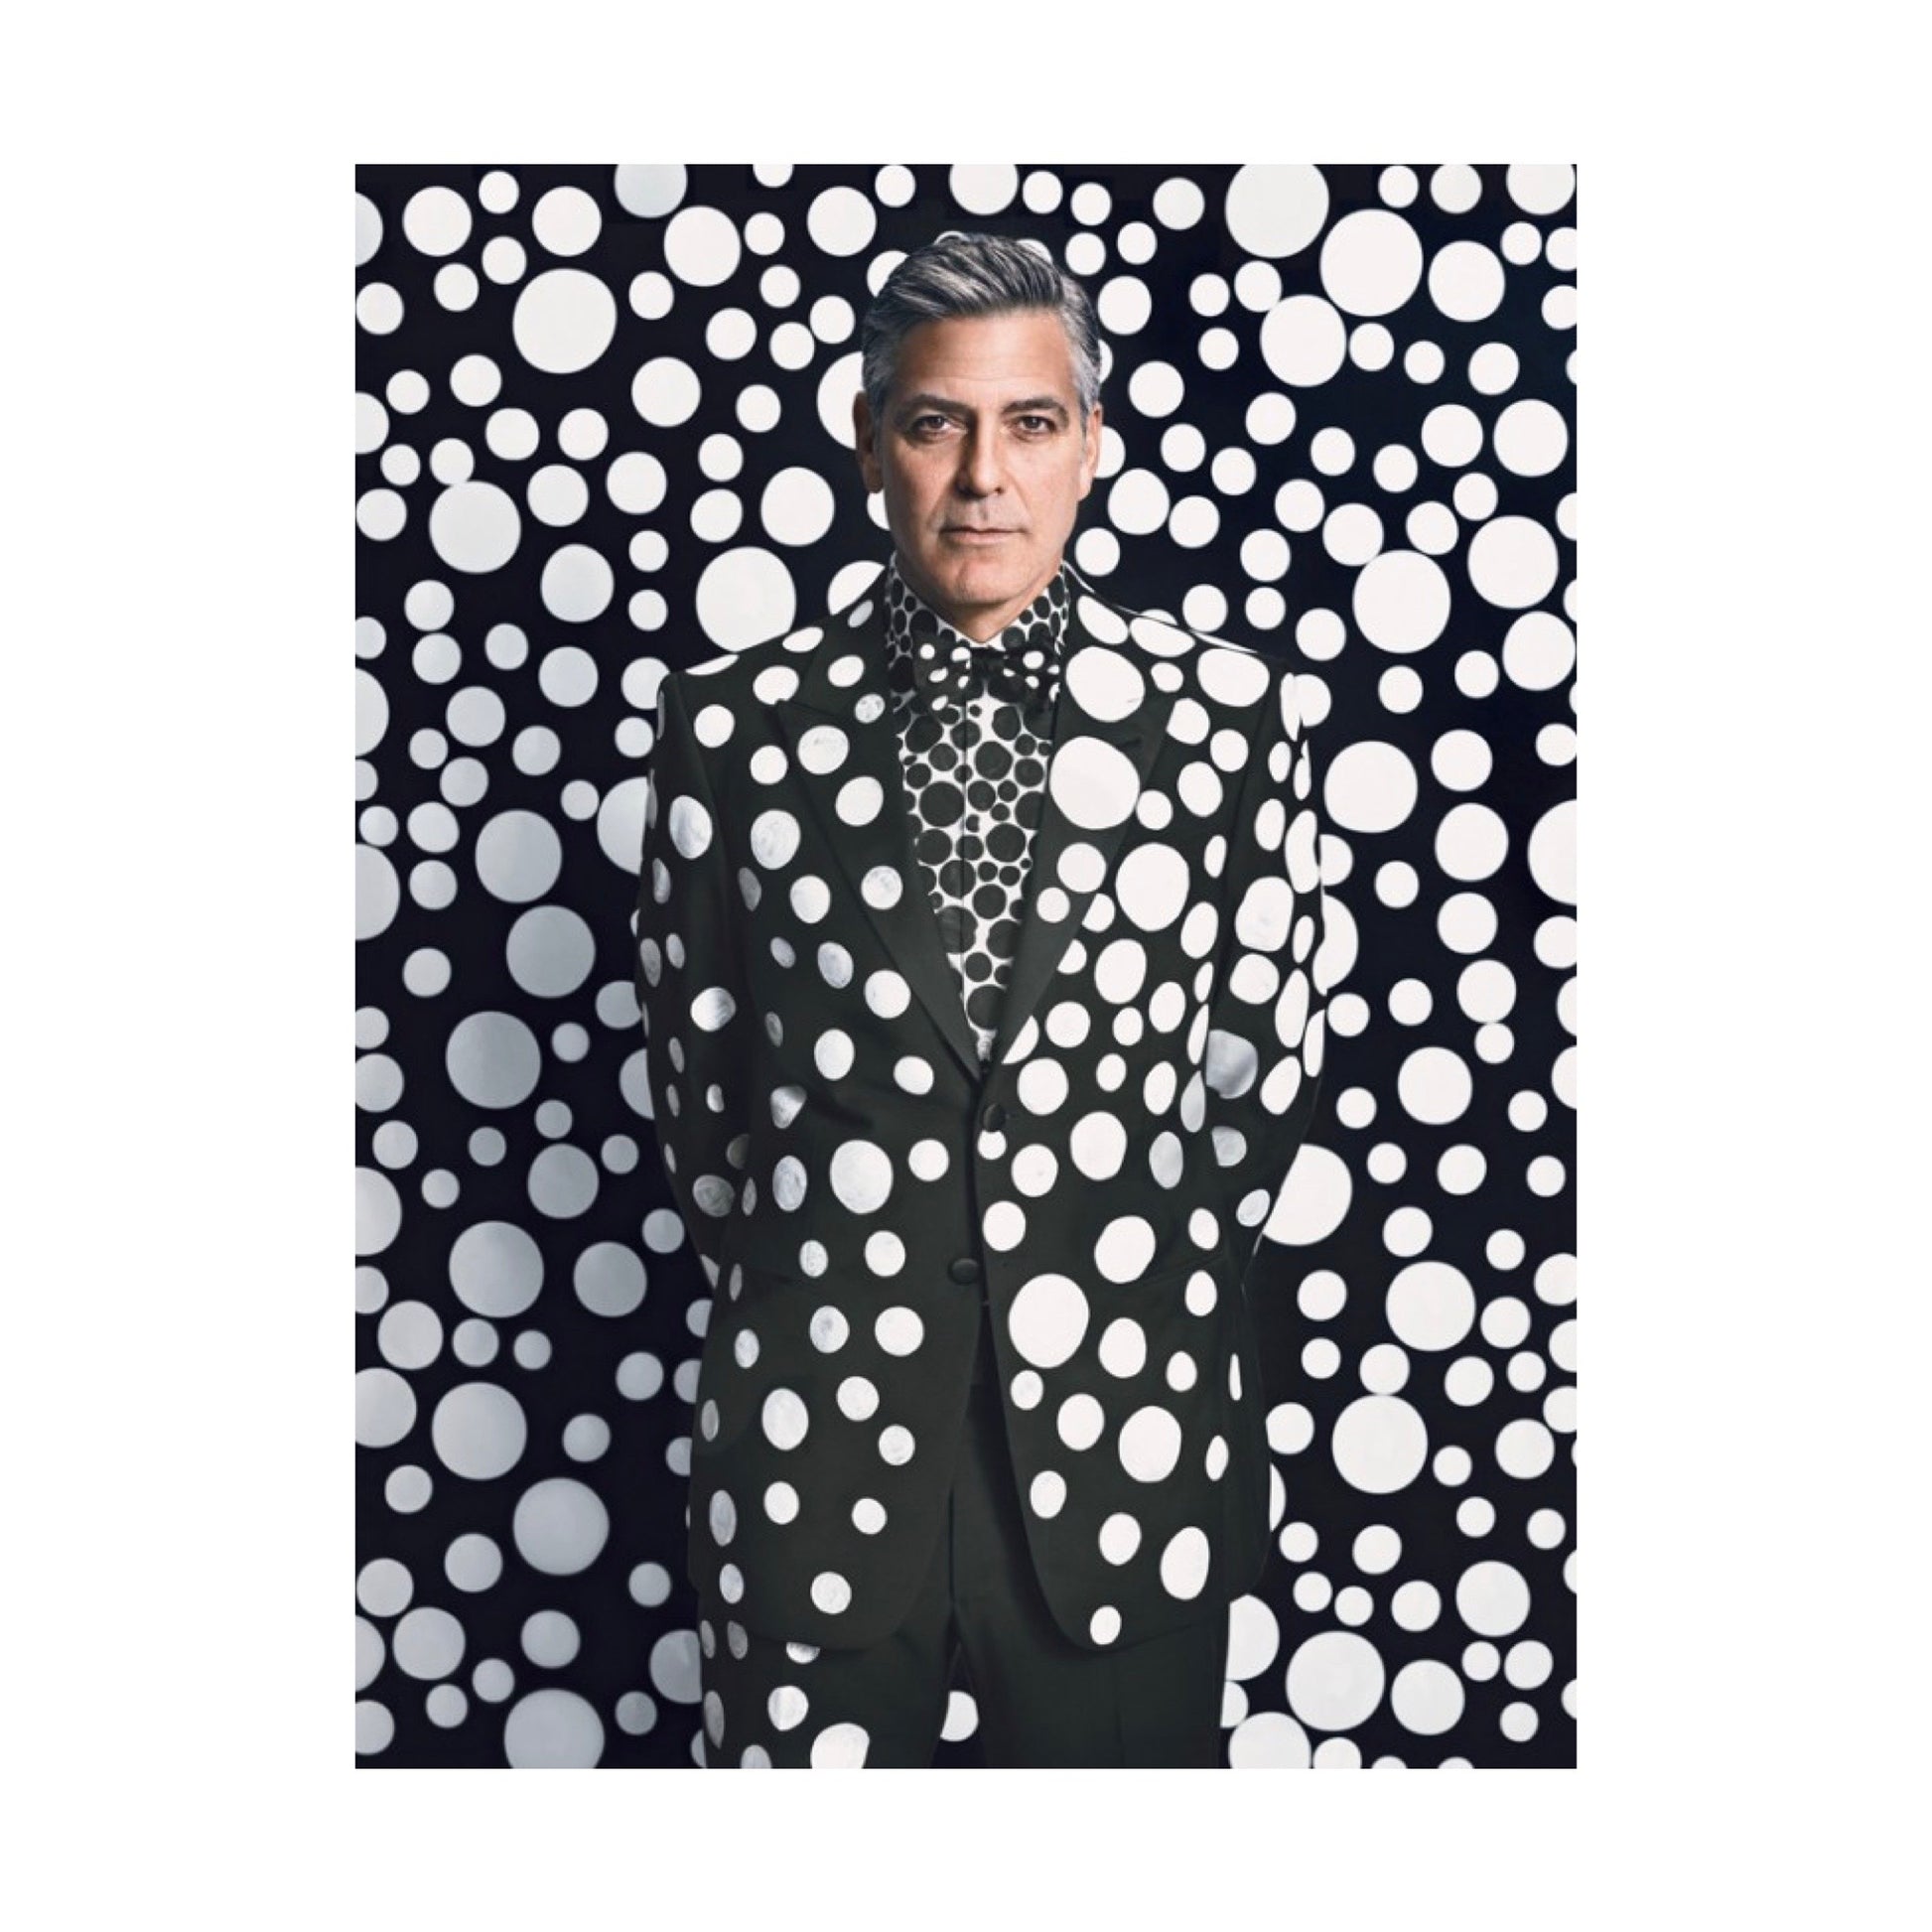 George Clooney by Yayoi Kusama: - relax it's only art